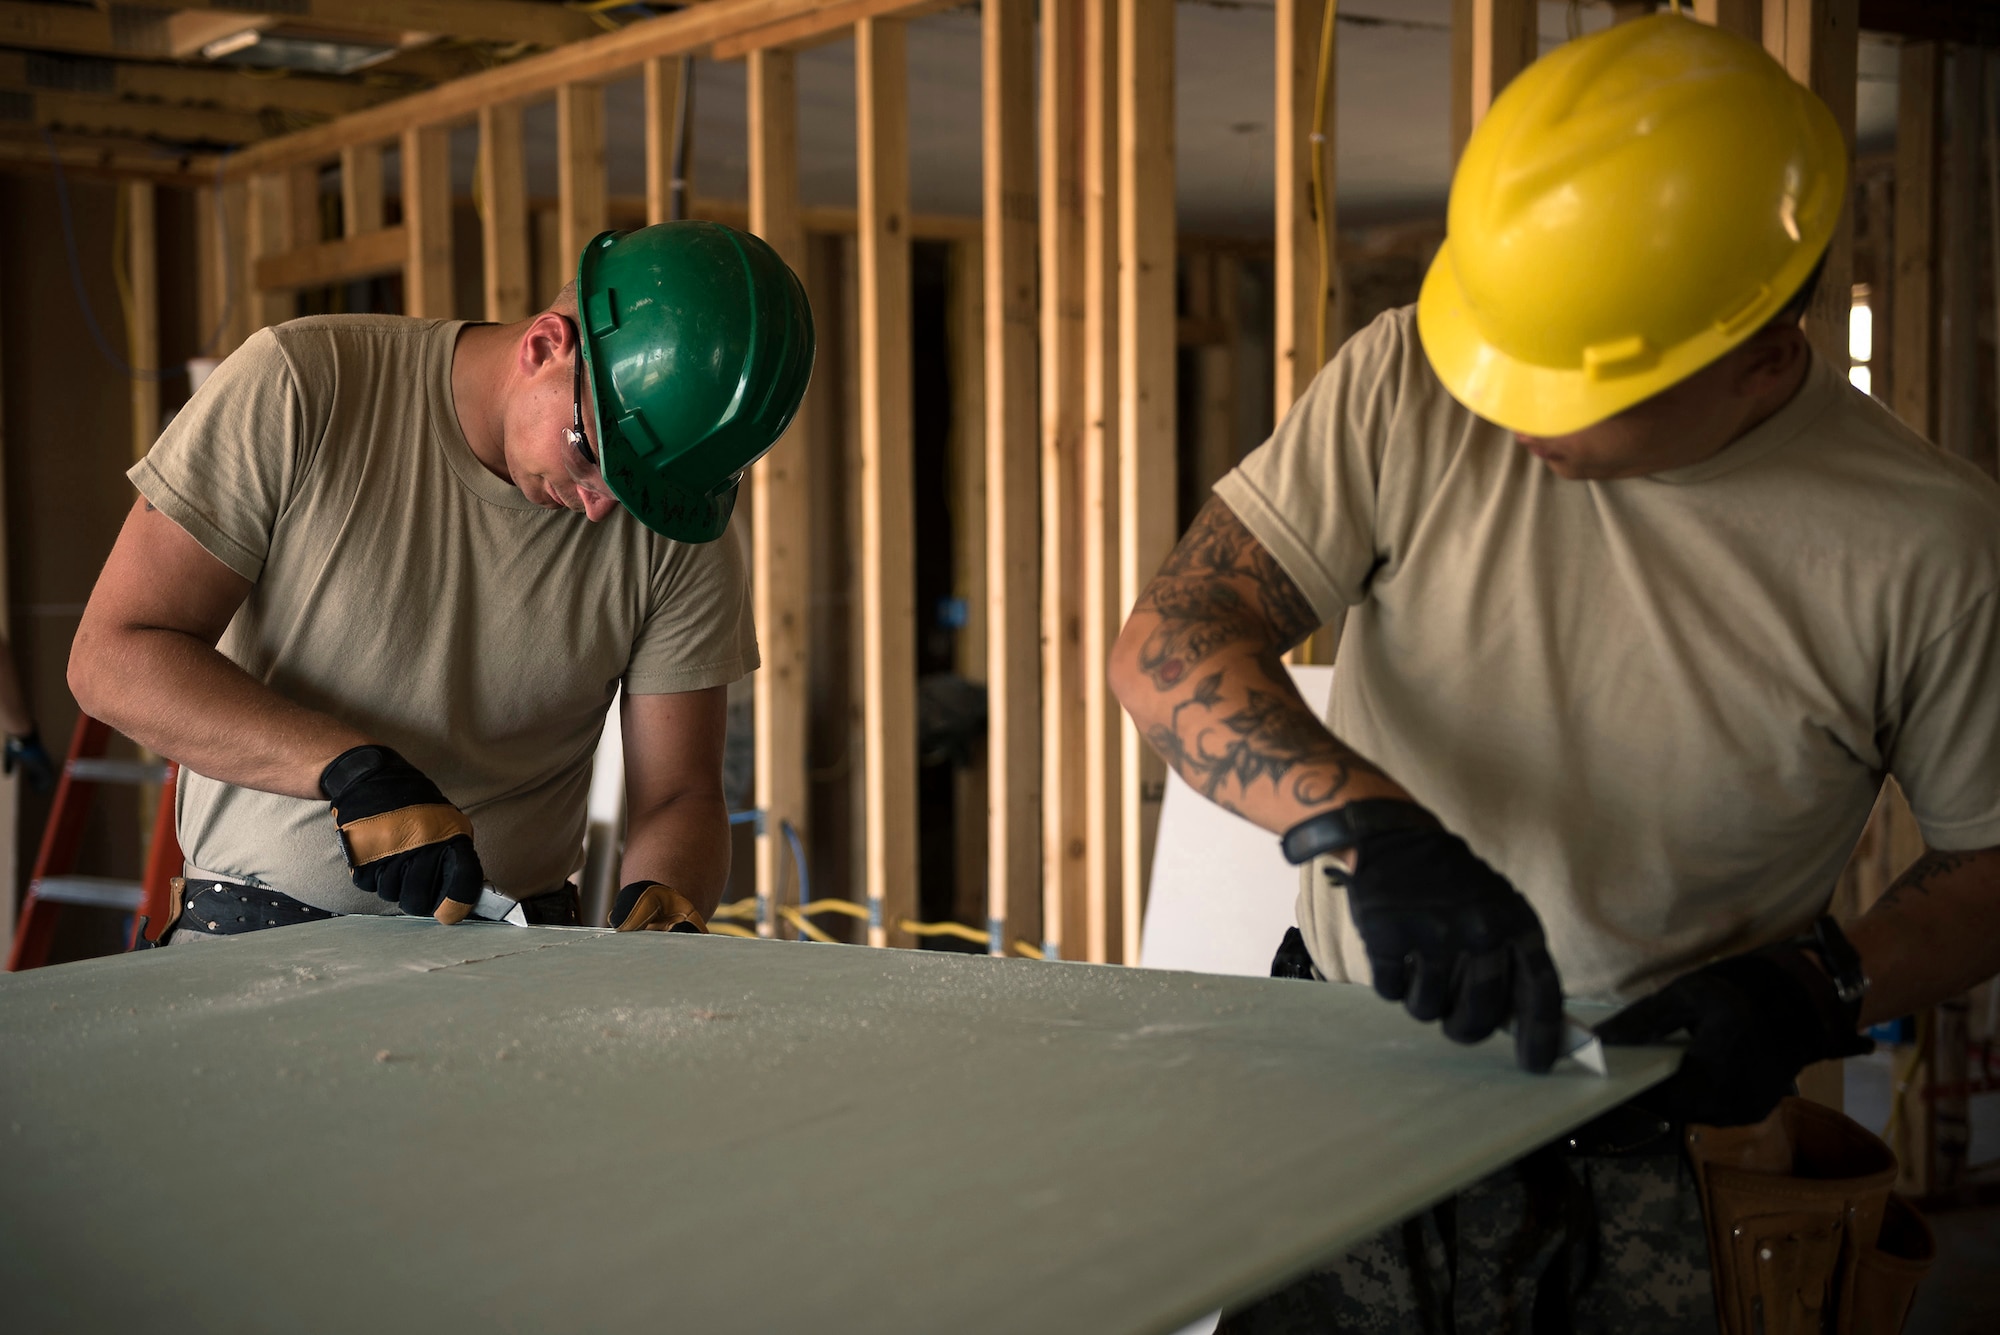 U.S. Army Staff Sgt. Stevn Henke, left, a section sergeant, and Spc. Dan Rose, a concrete and masonry specialist, both with the 230th Vertical Engineer Company, Montana Army National Guard, cut drywall in Crow Agency, Mont., July 24, 2017. The soldiers teamed up with the Illinois Air National Guard’s 182nd Civil Engineer Squadron to help build homes for Native American veterans as part of the Department of Defense’s Innovative Readiness Training civil-military relations program. (U.S. Air National Guard photo by Tech. Sgt. Lealan Buehrer)